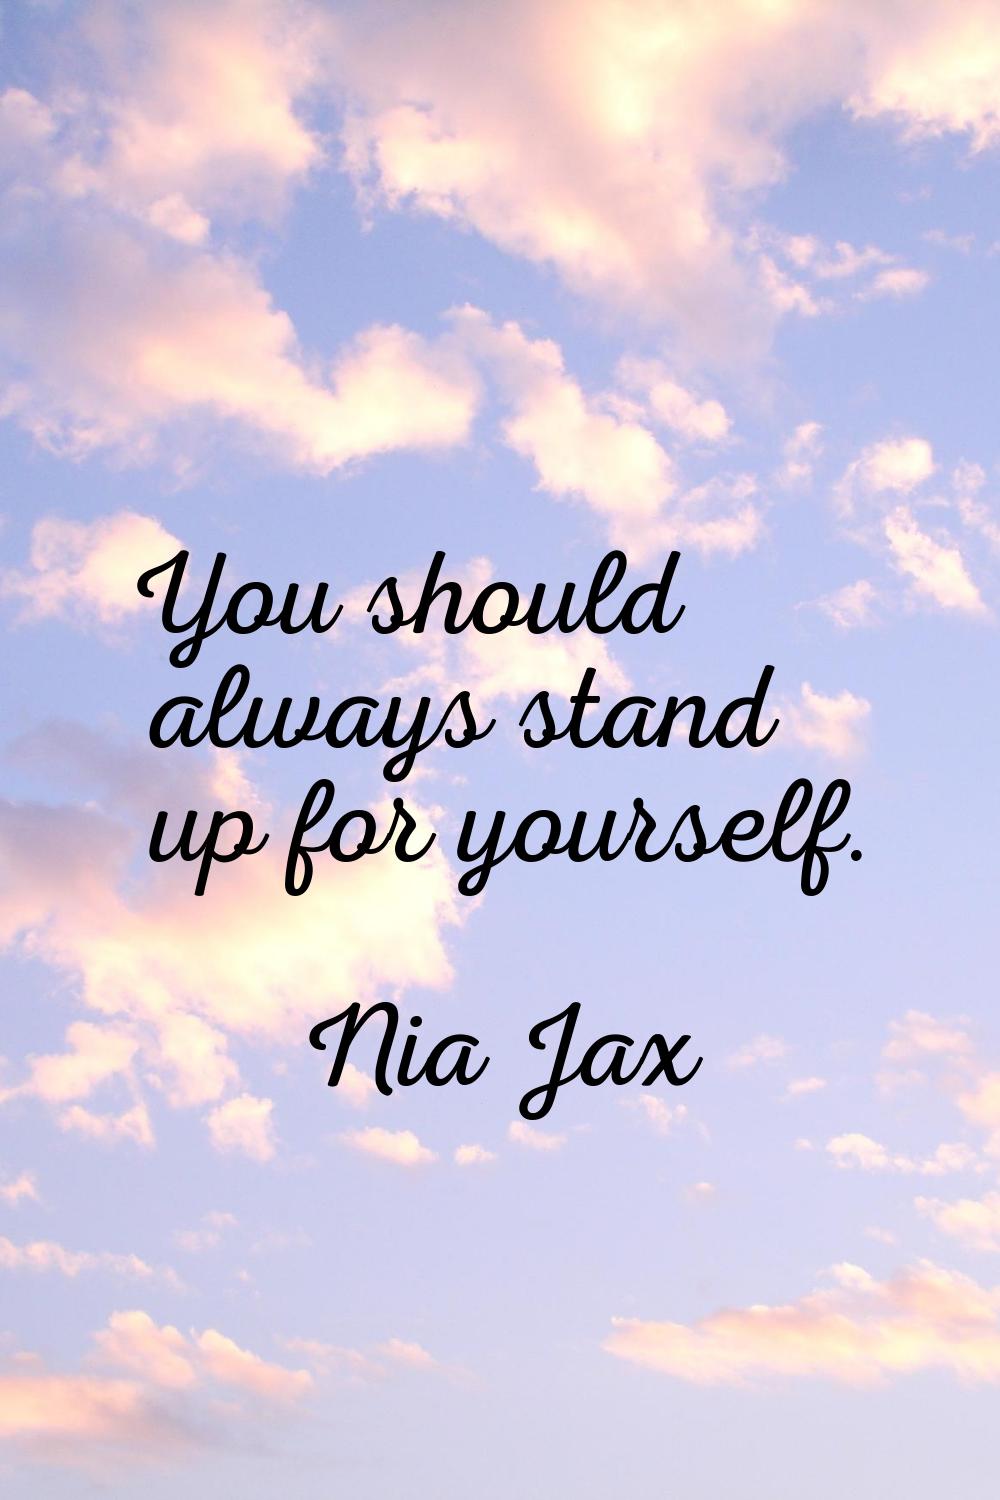 You should always stand up for yourself.